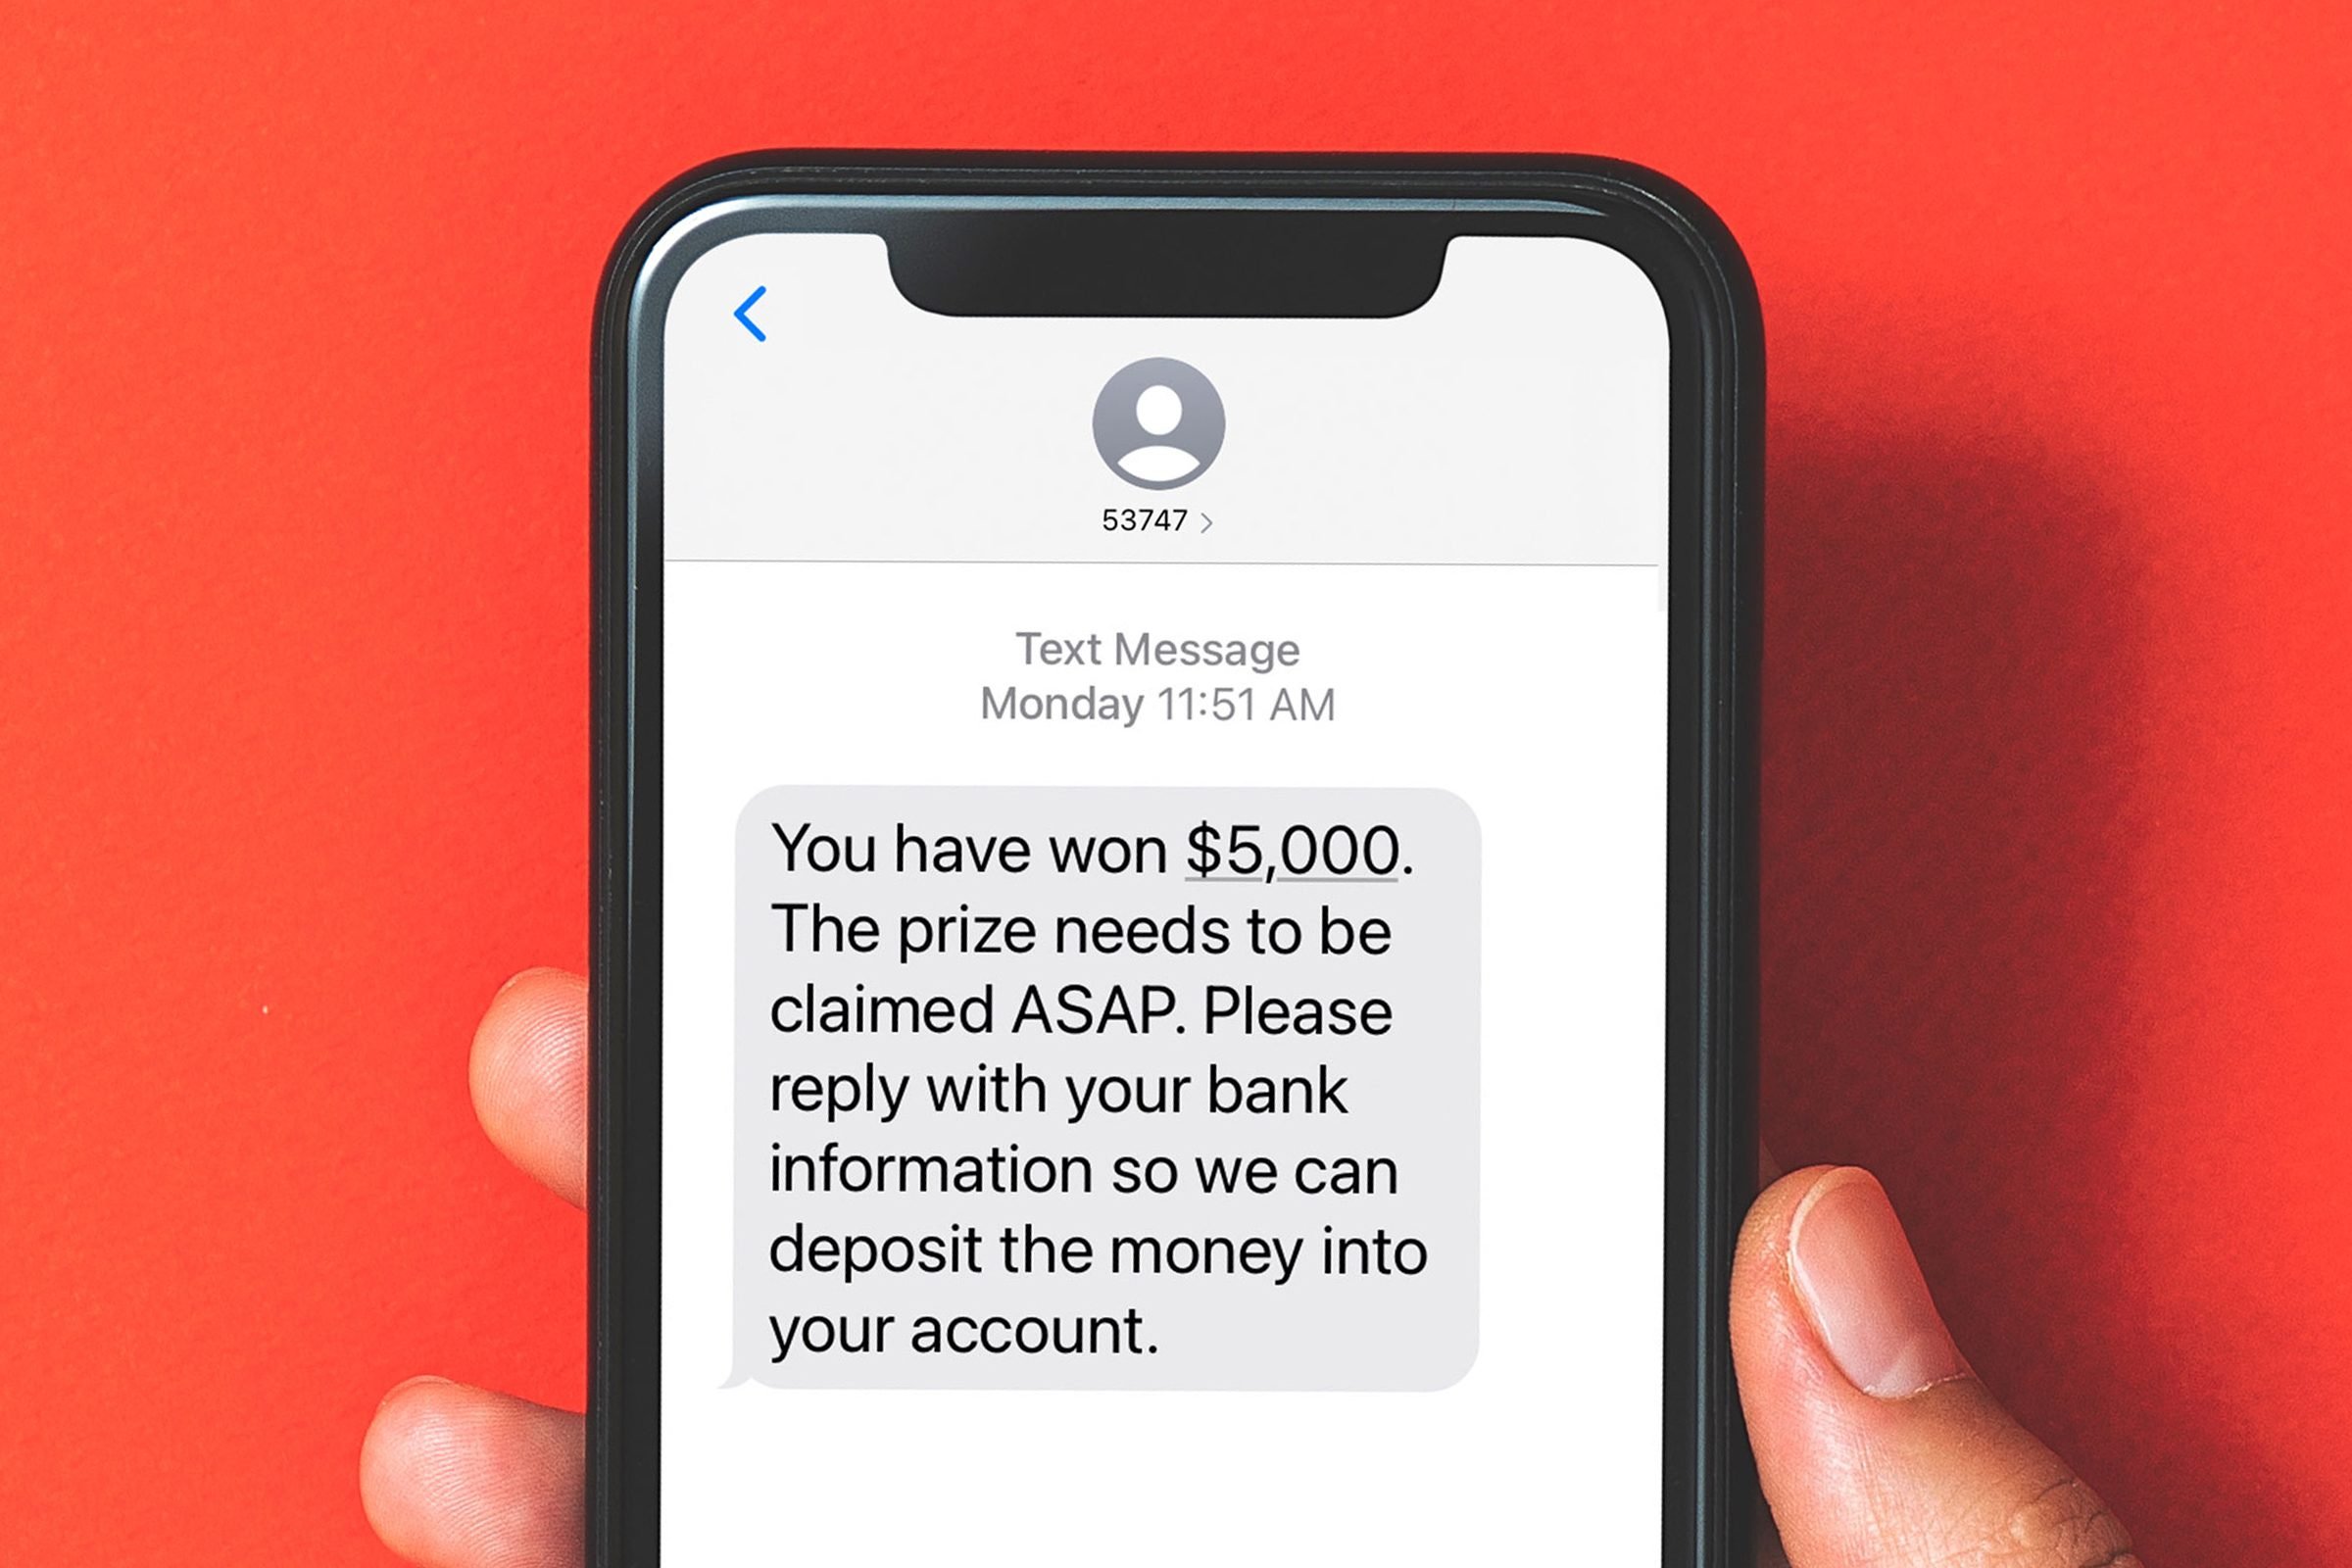 Phone screen with a text from an unknown number: * "You have won $5,000. The prize needs to be claimed ASAP. Please reply with your bank information so we can deposit the money into your account."